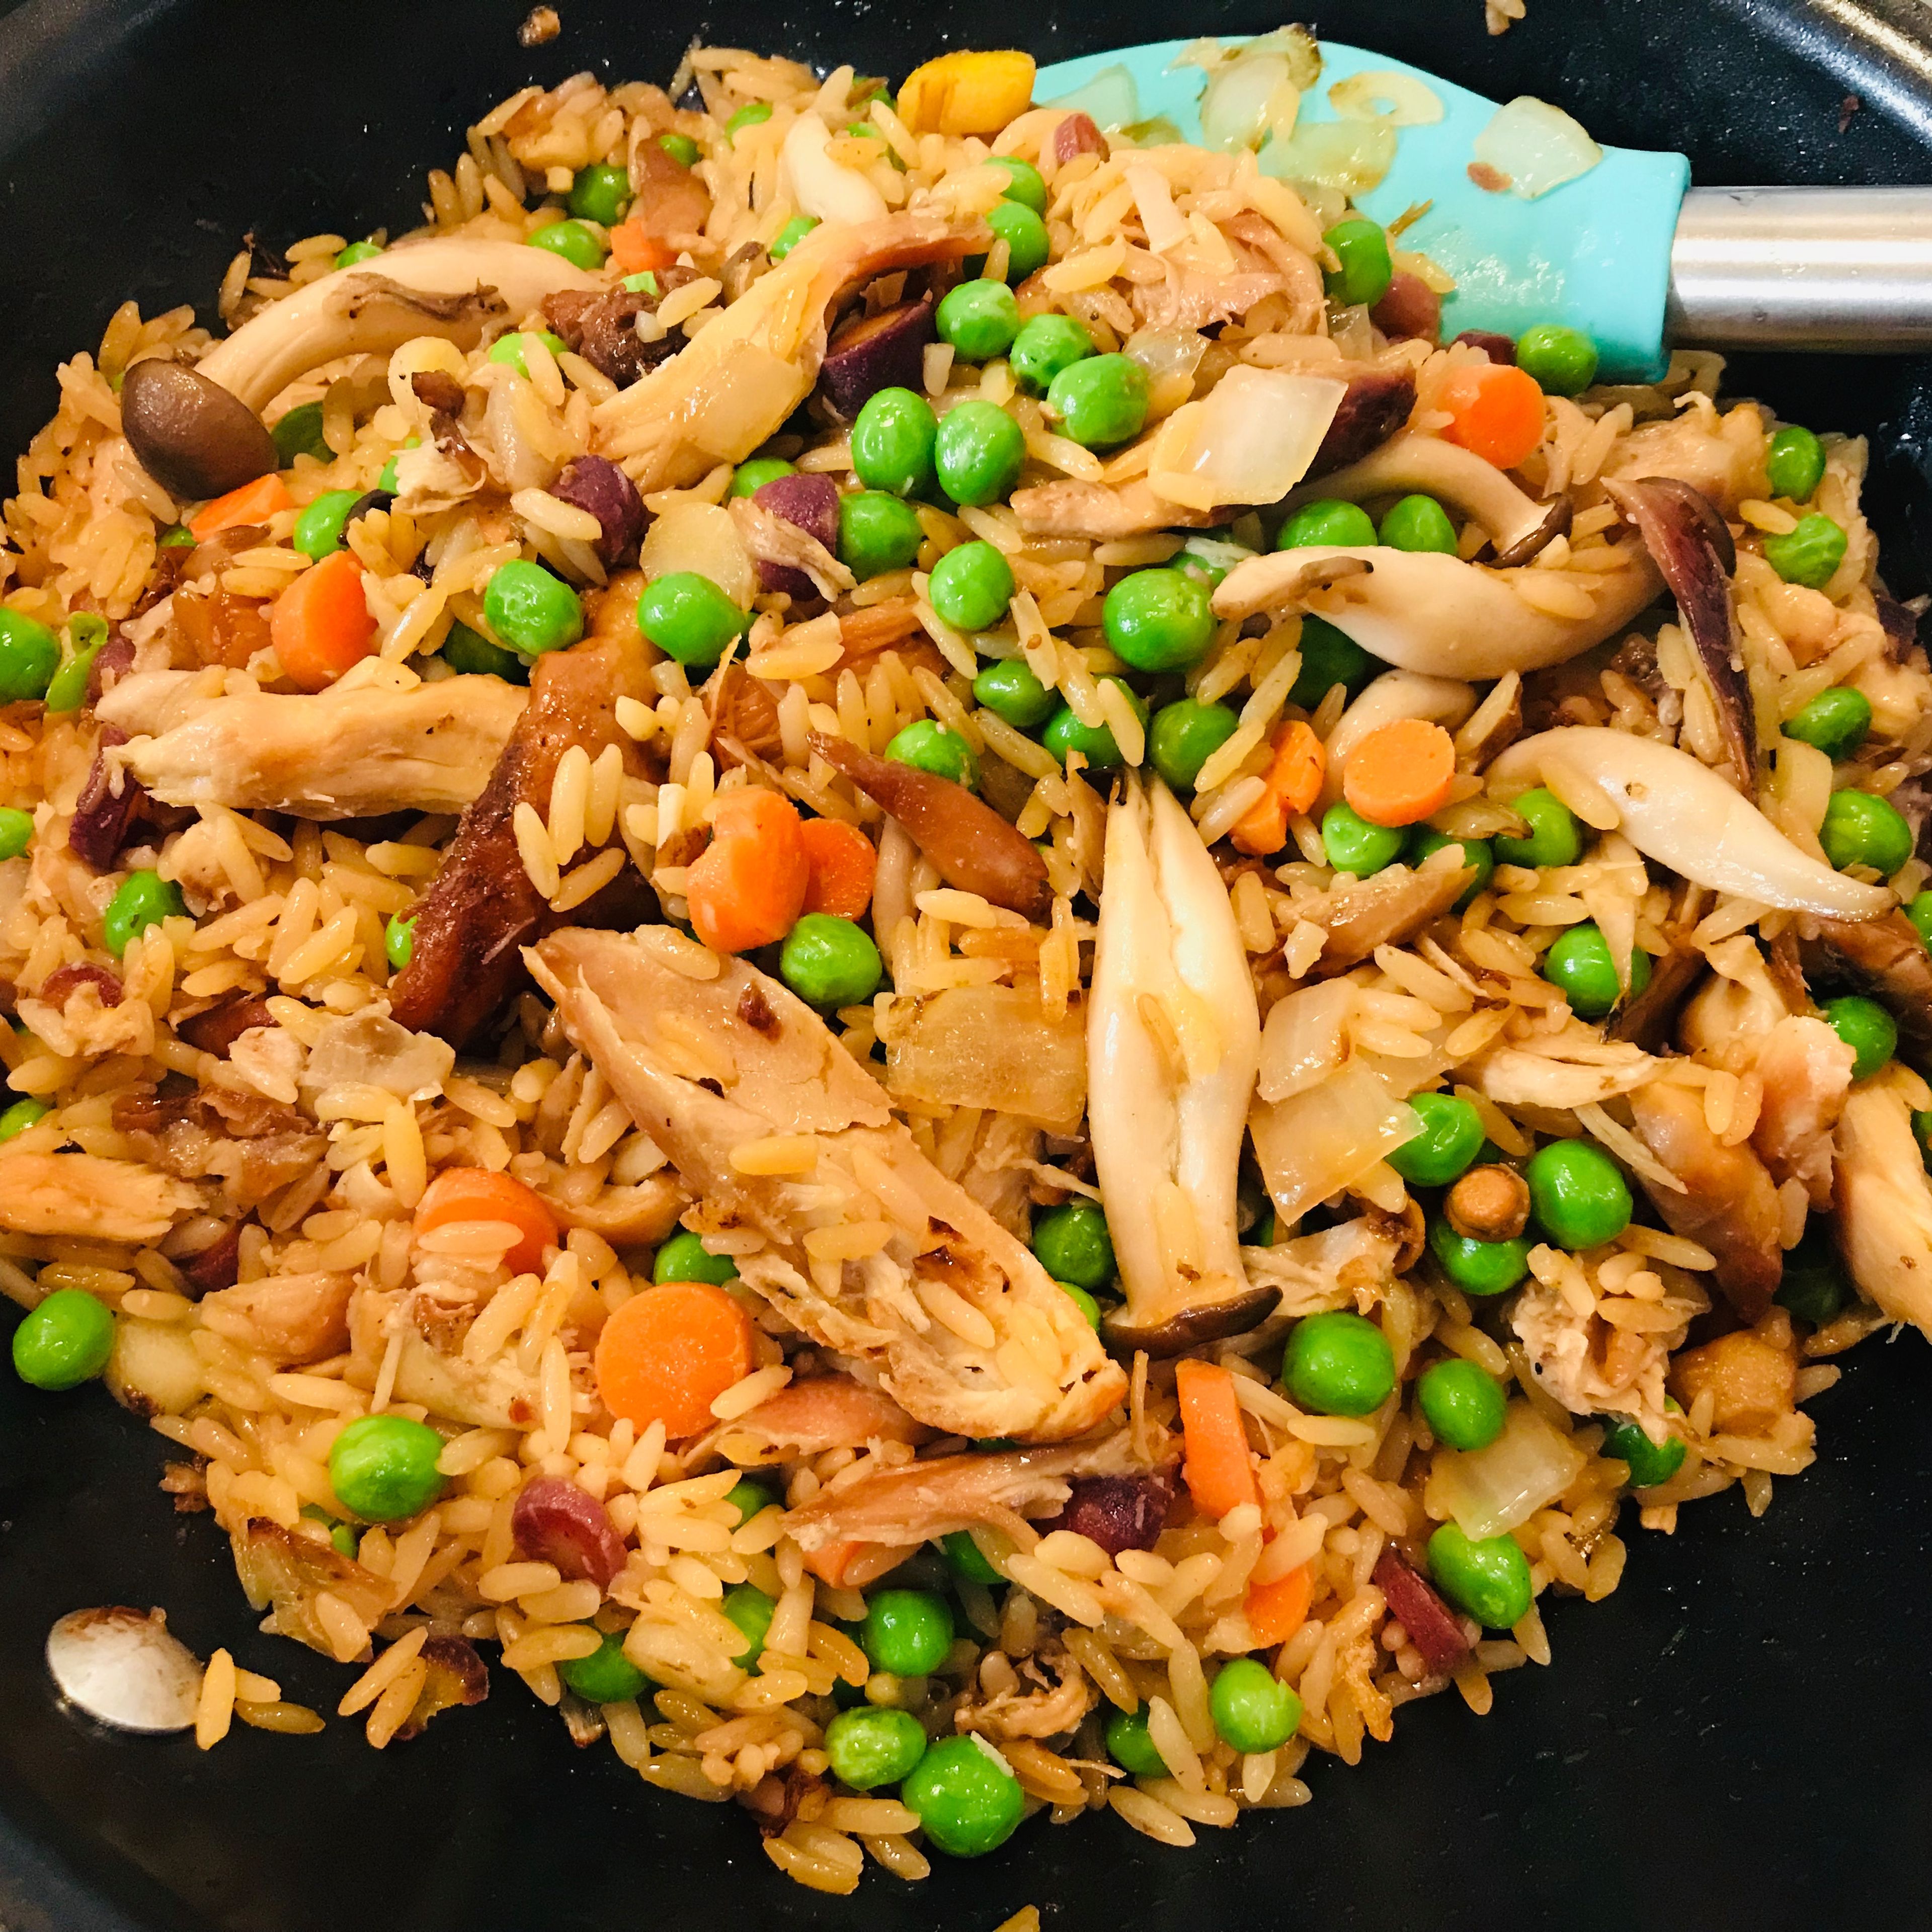 Add raw mixed veggies into the pan with chicken, stir fry on medium low for 2 minutes or until any released moisture is gone. Then, add cooked rice and frozen veggies (if any) and continue stir-frying for 3-5 minute. Make sure all ingredients are well mixed and cooked.